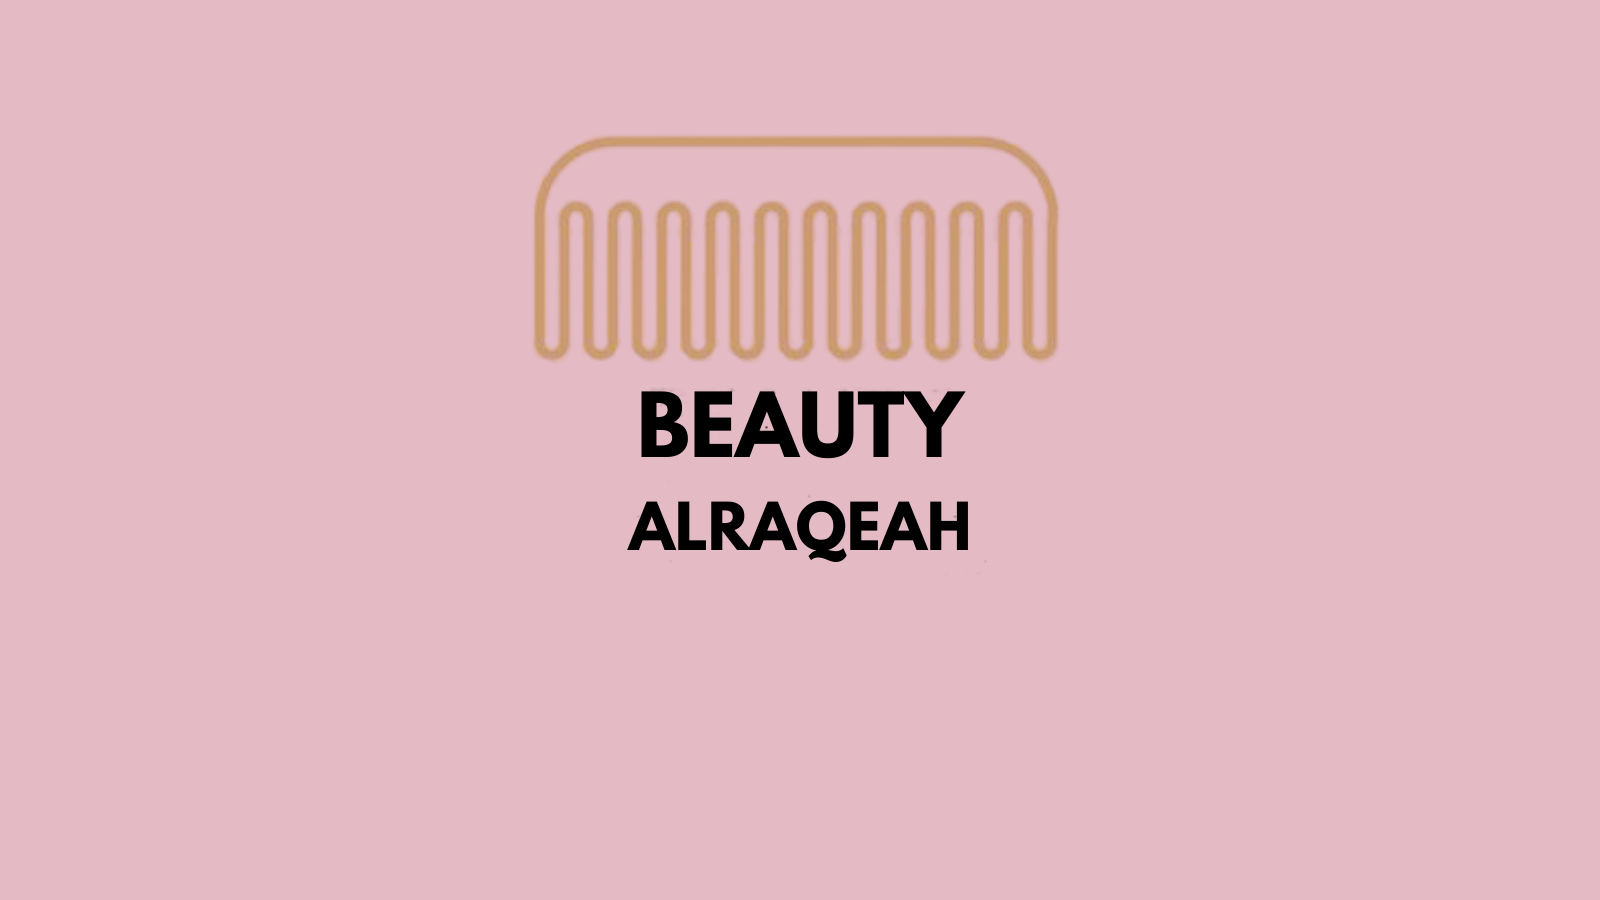 beauty alraqeah